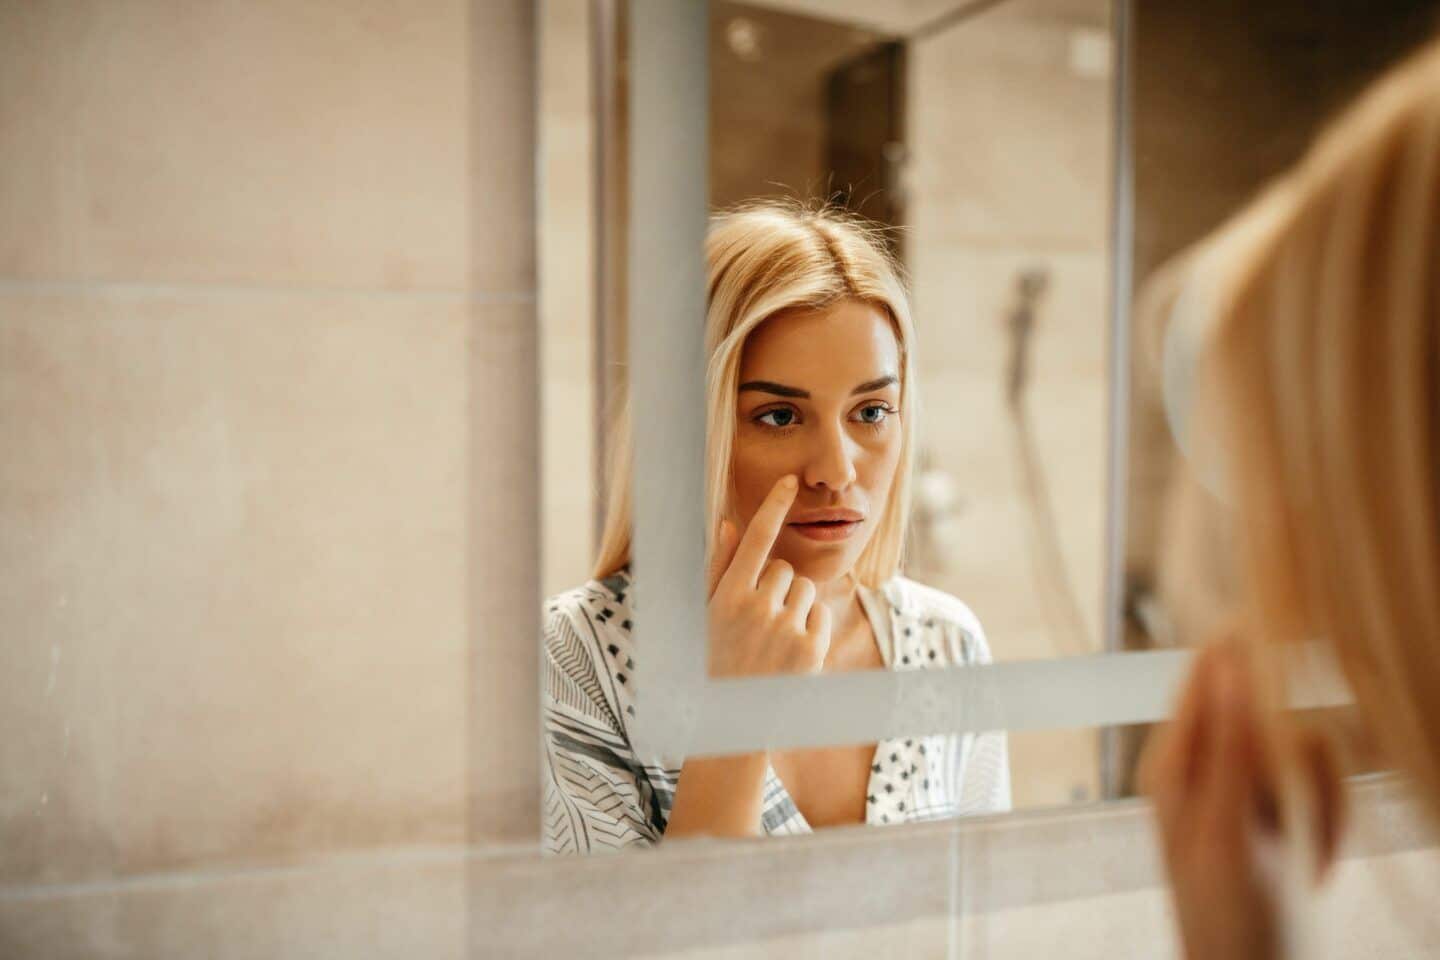 The size of skin pores is mainly genetically determined. People who tend to have oily skin tend to have larger pores and are also more susceptible to pimples, acne and general impurities